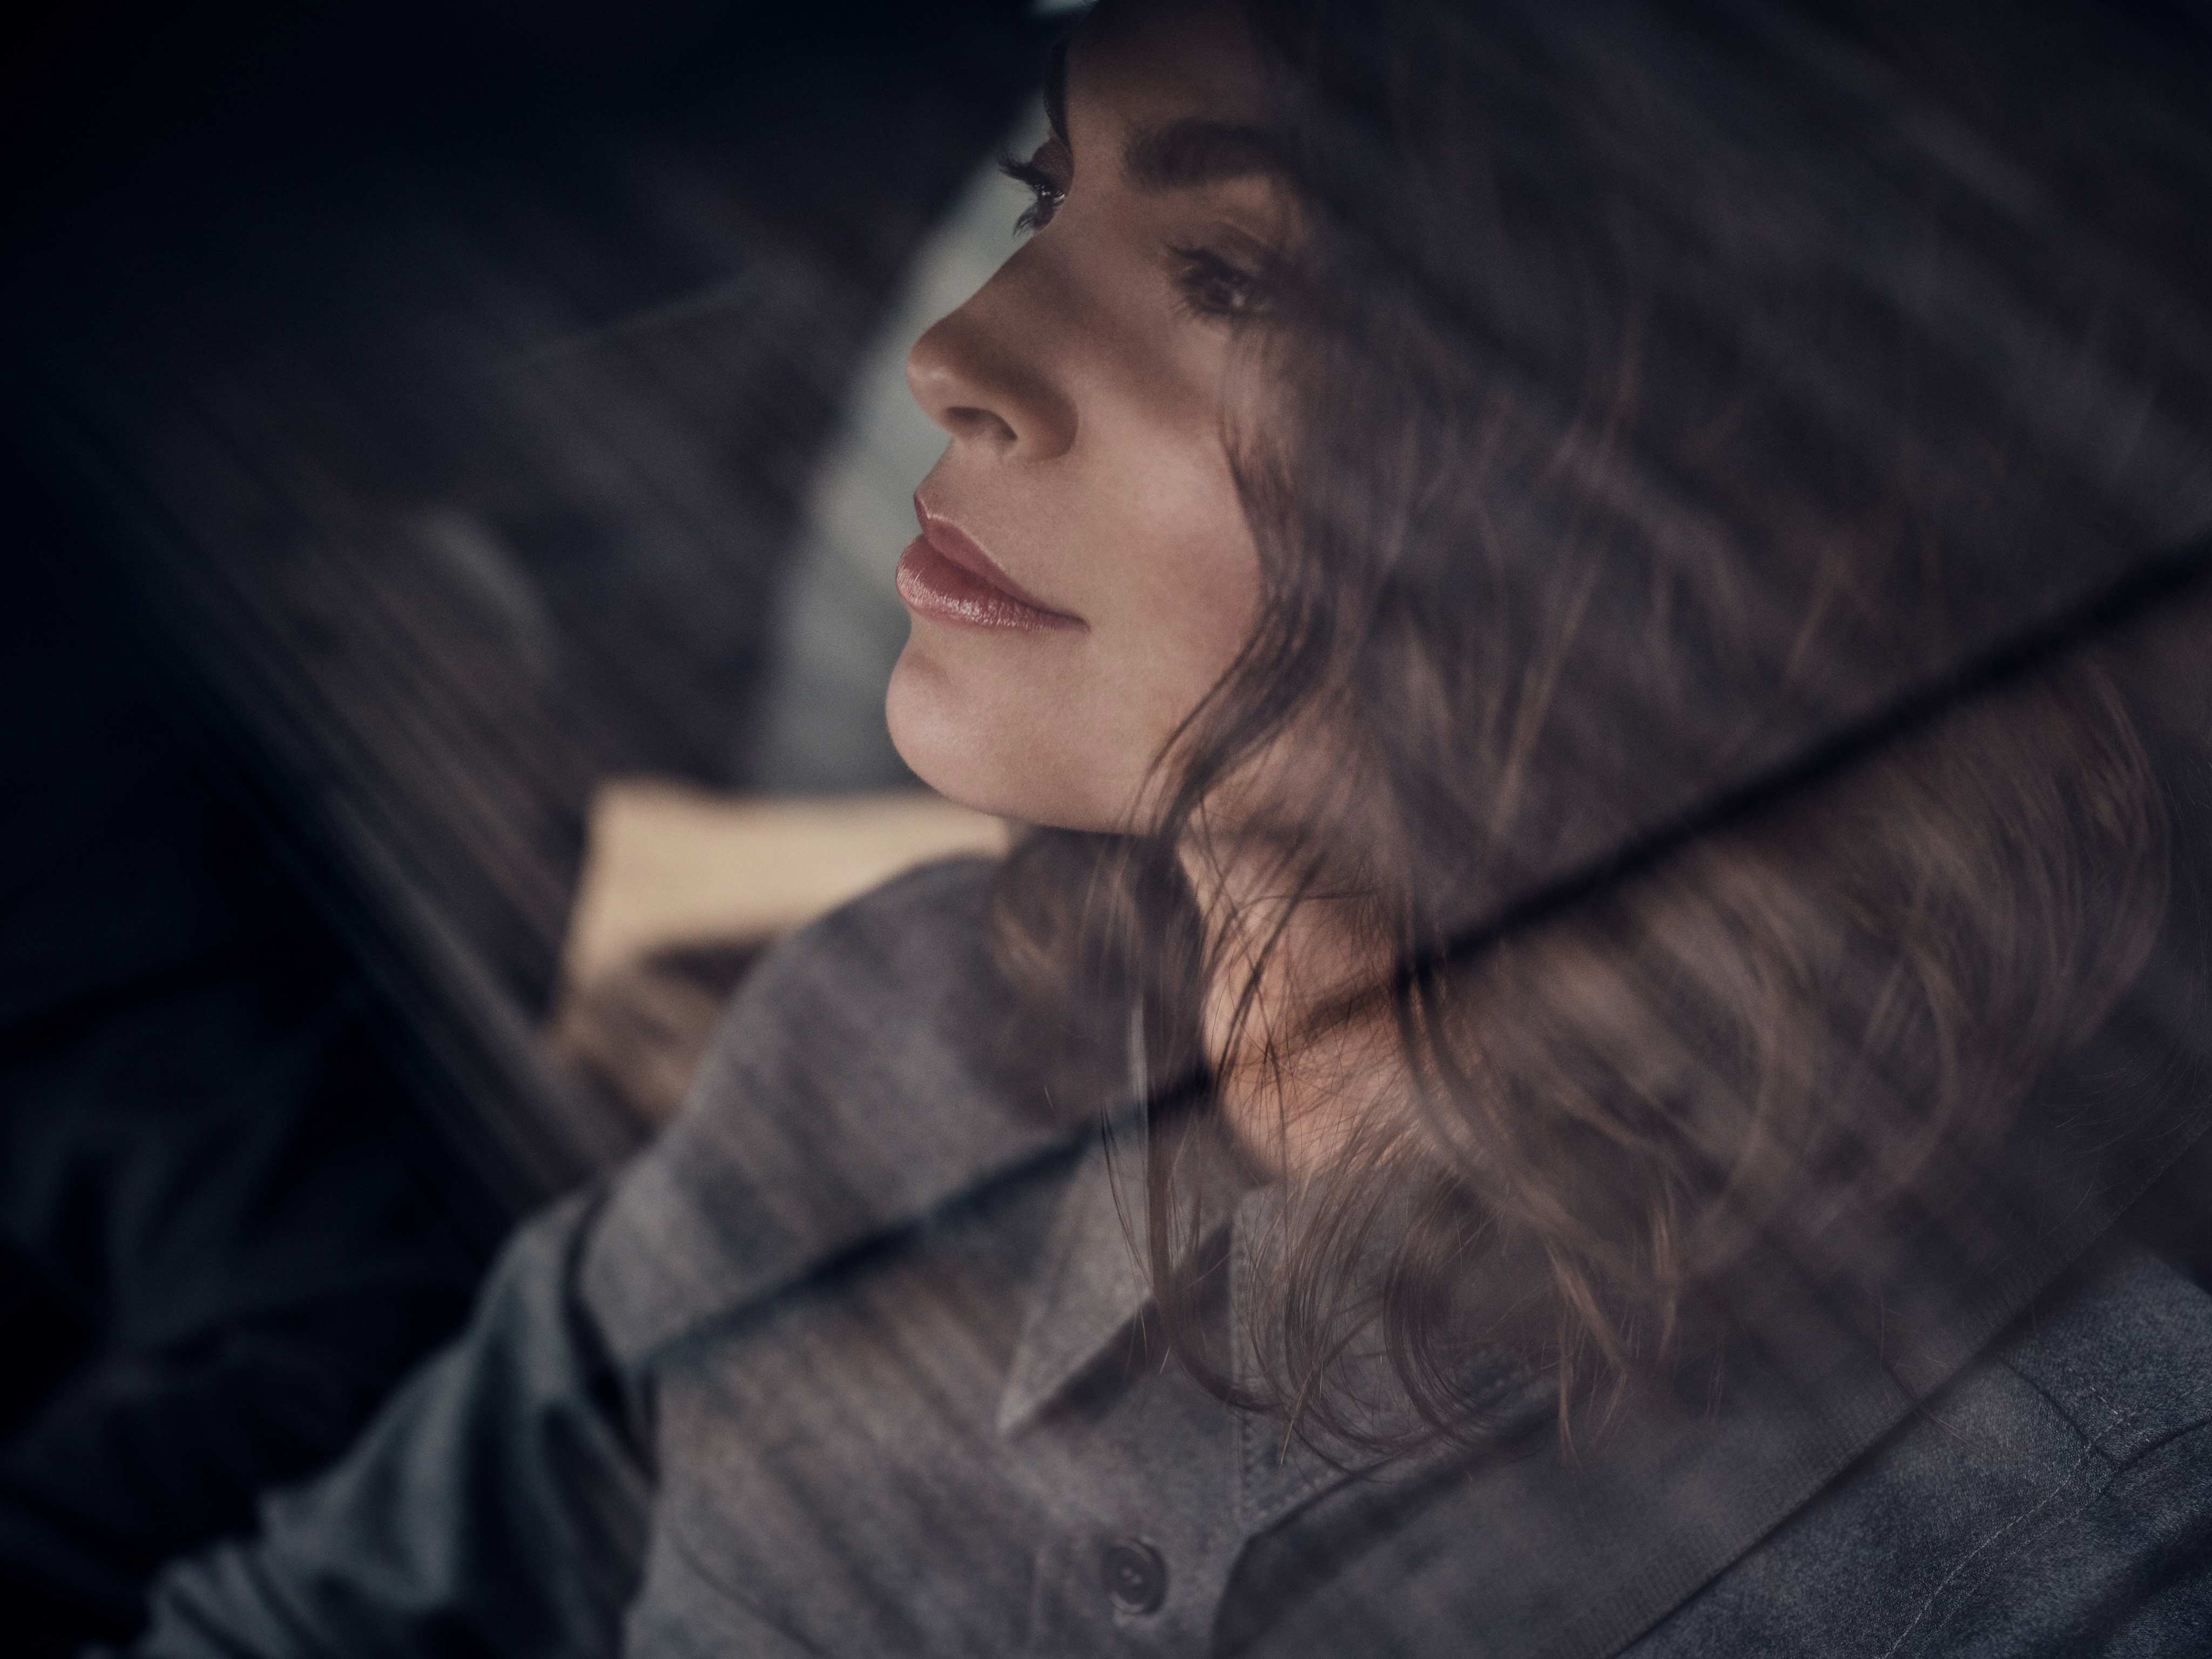 Woman behind the window sitting in a Volvo car.